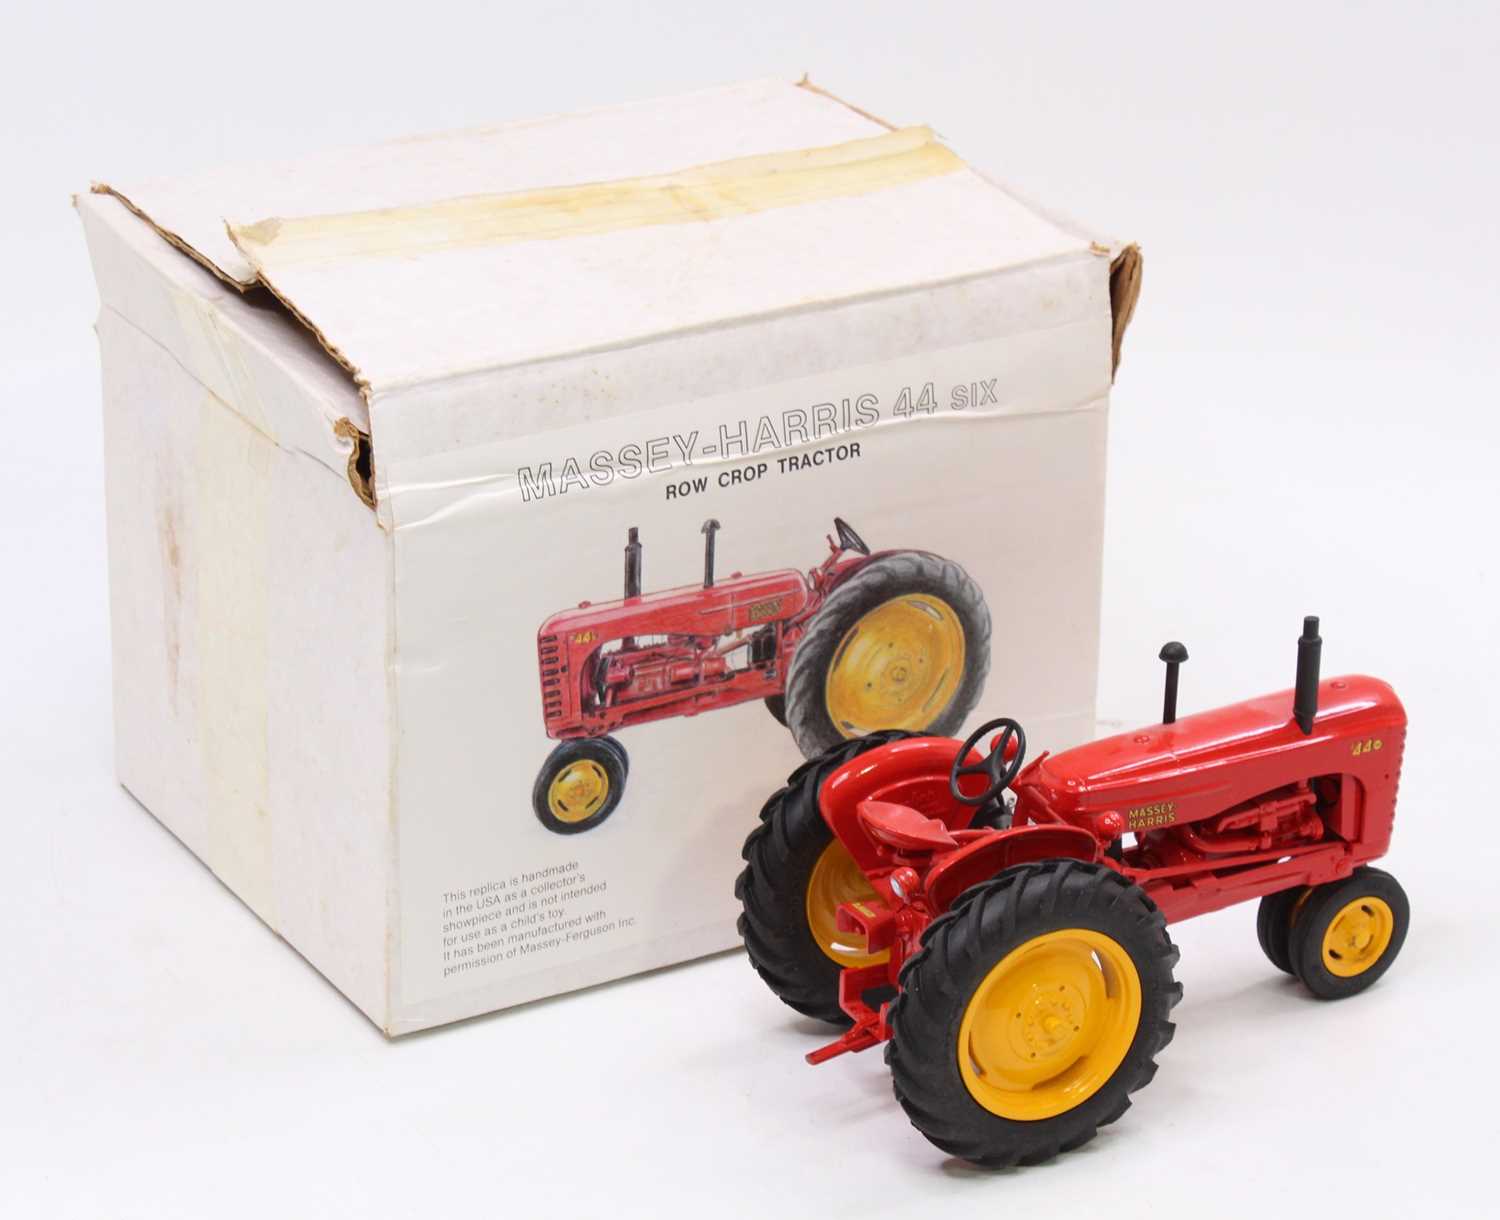 A Stephan Toys of USA 1/16th scale Massey Harris 44 six Row Crop Tractor, a limited edition sold - Bild 2 aus 2